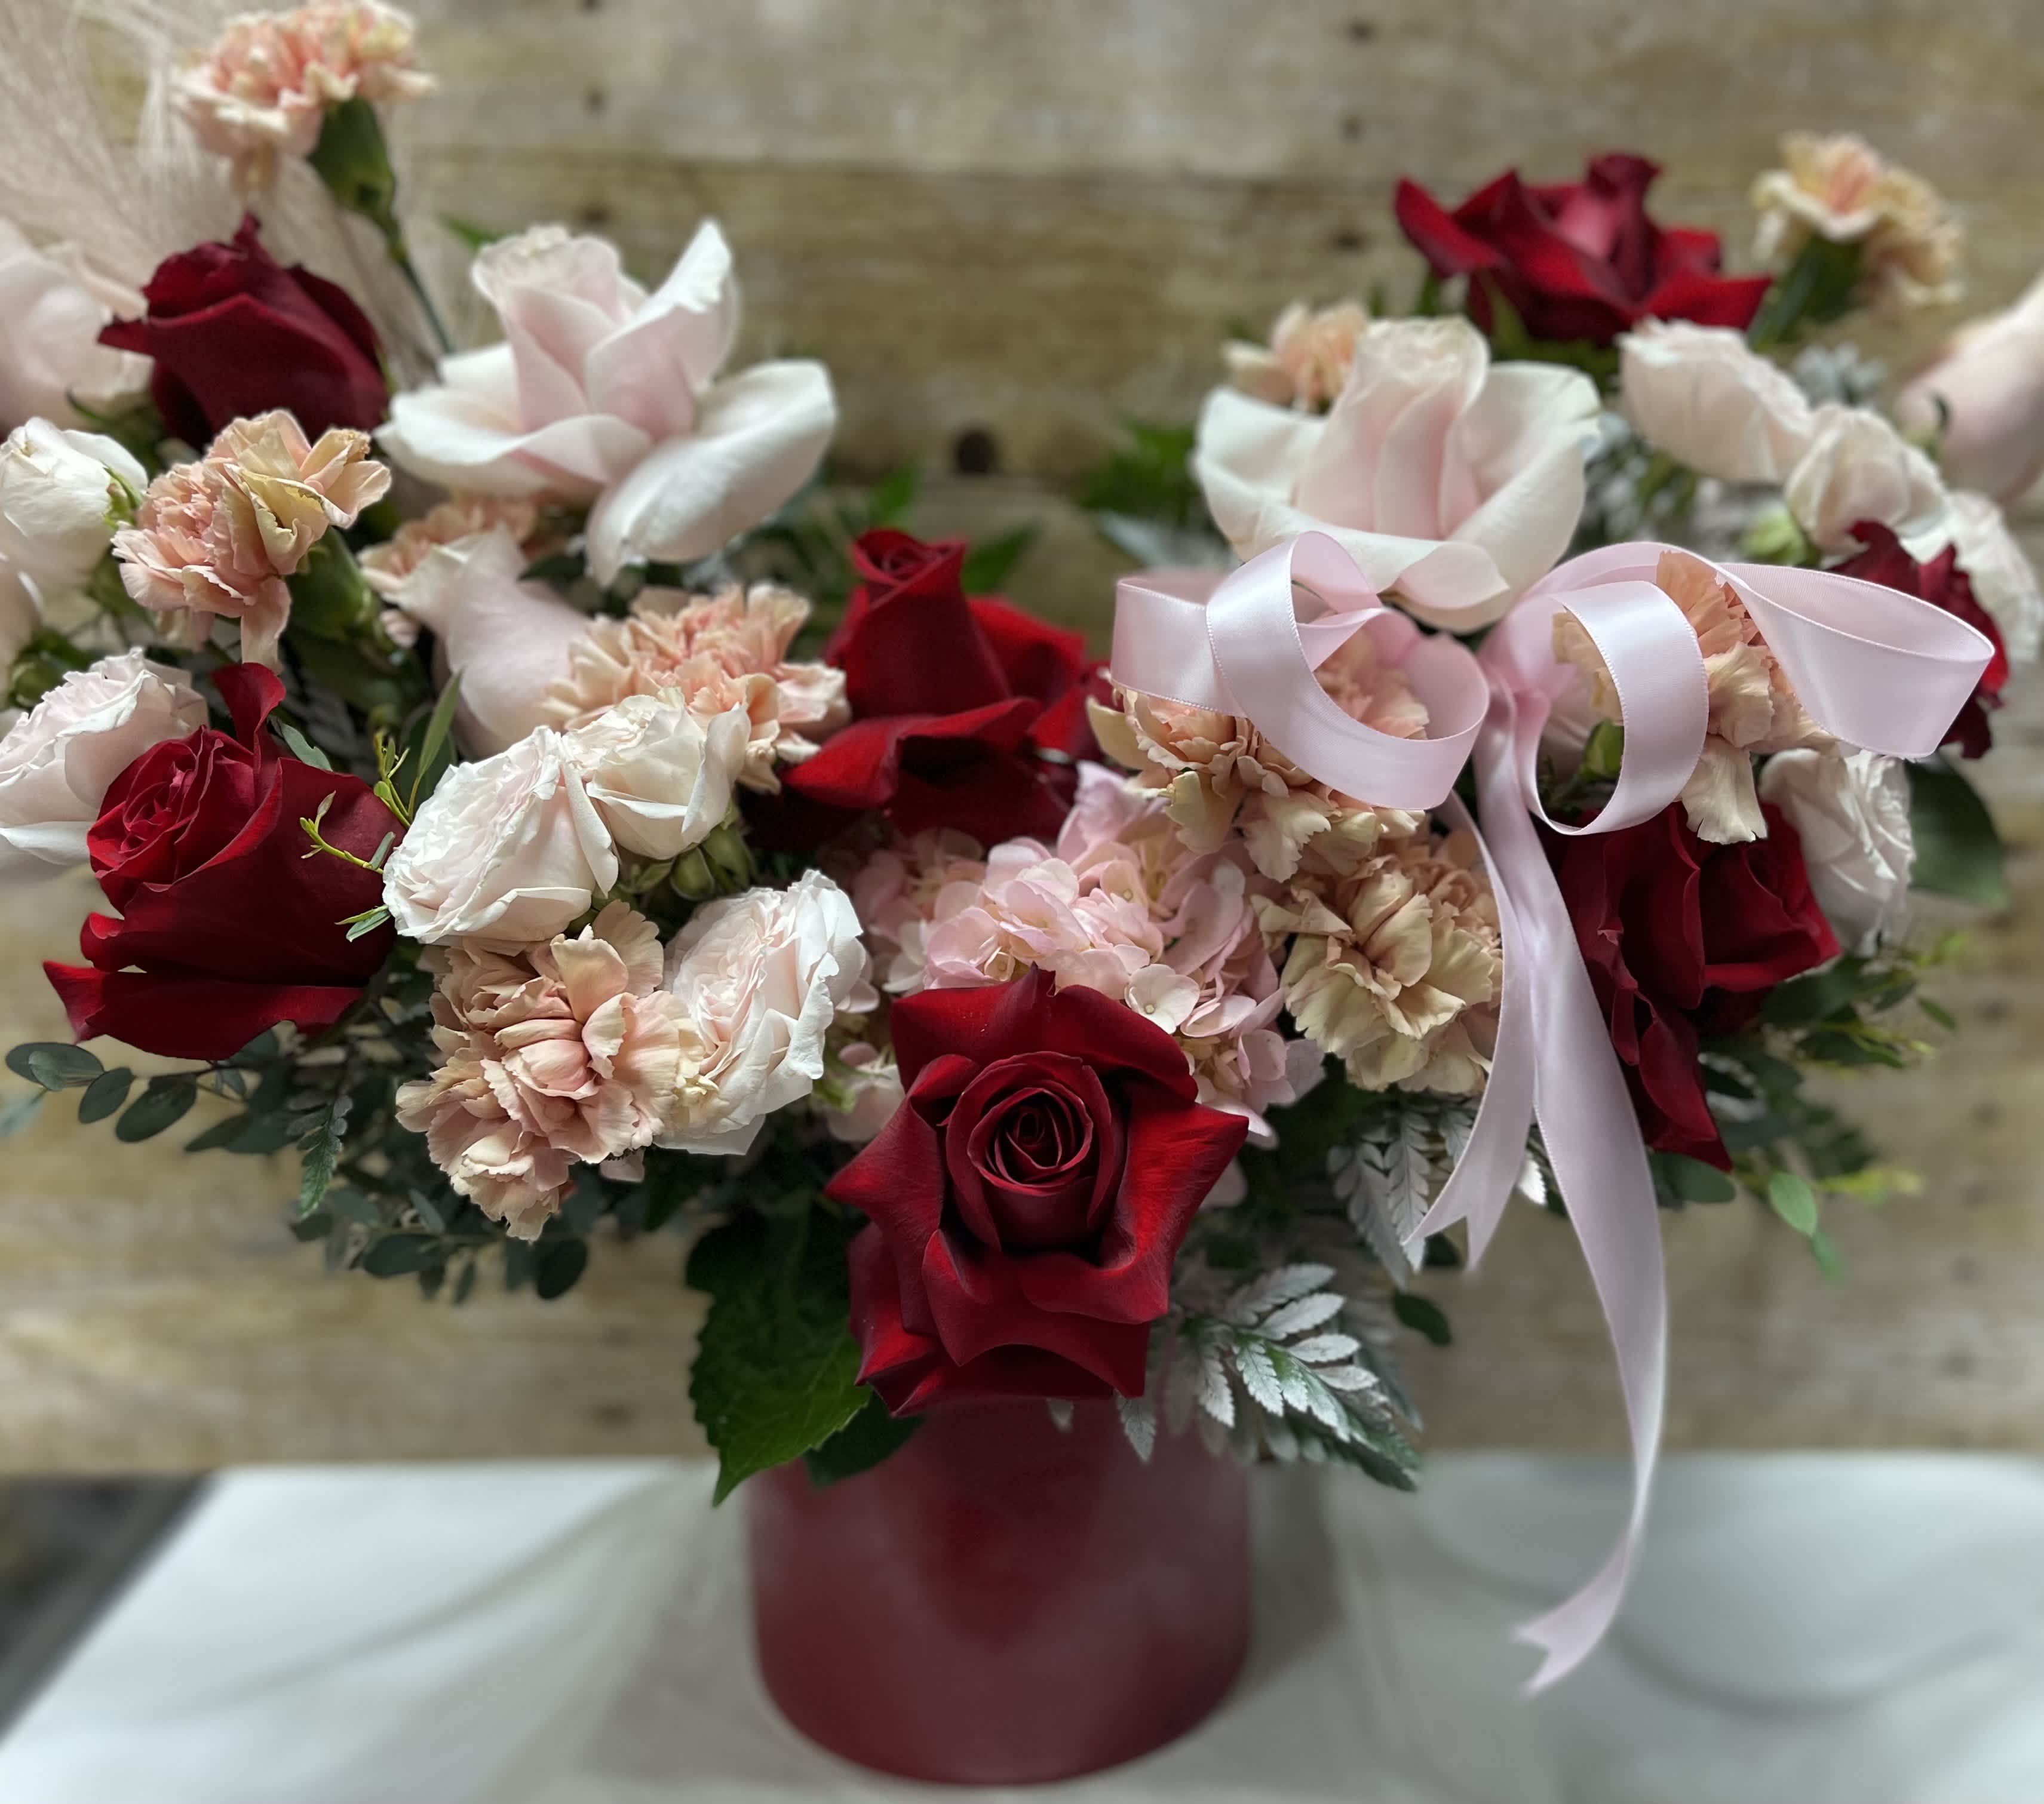 BOHEMIAN RHAPSODY - A DESIGN IN A FLORAL ARRANGEMENT! AS DRAMATIC AS THE LYRICS OF THIS SONG !THE RED AND PINK COLORS THAT REFLECT PASSION AND SWEET LOVE!! WITH ITS REBELLIOUS DESIGN THAT ONLY LOVING EYES WILL SEE A HEART.